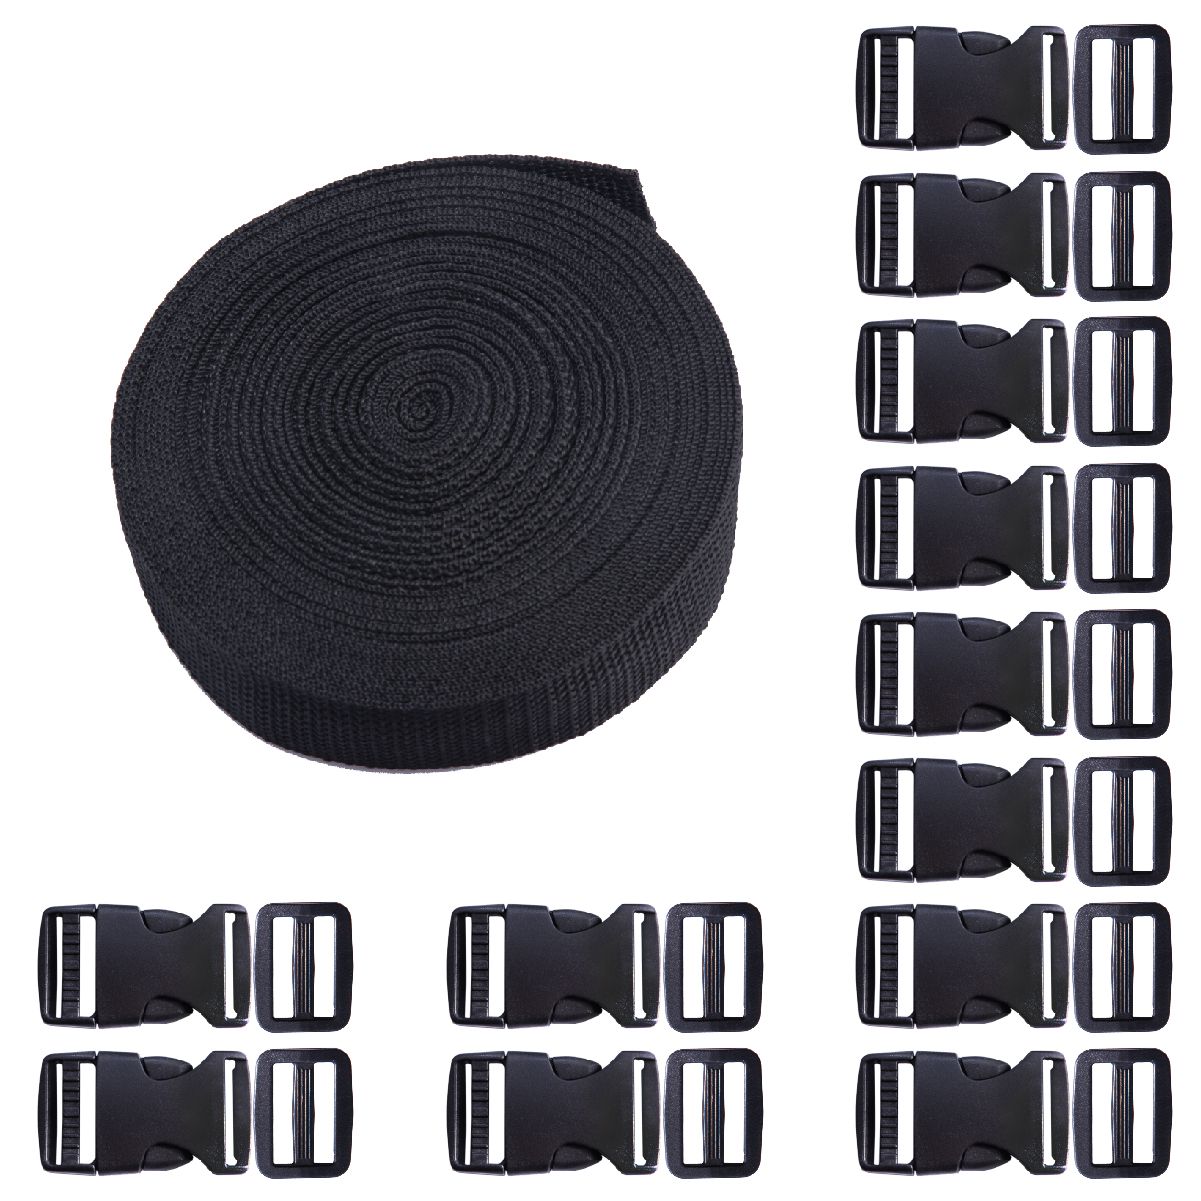 1 nylon strap with buckle